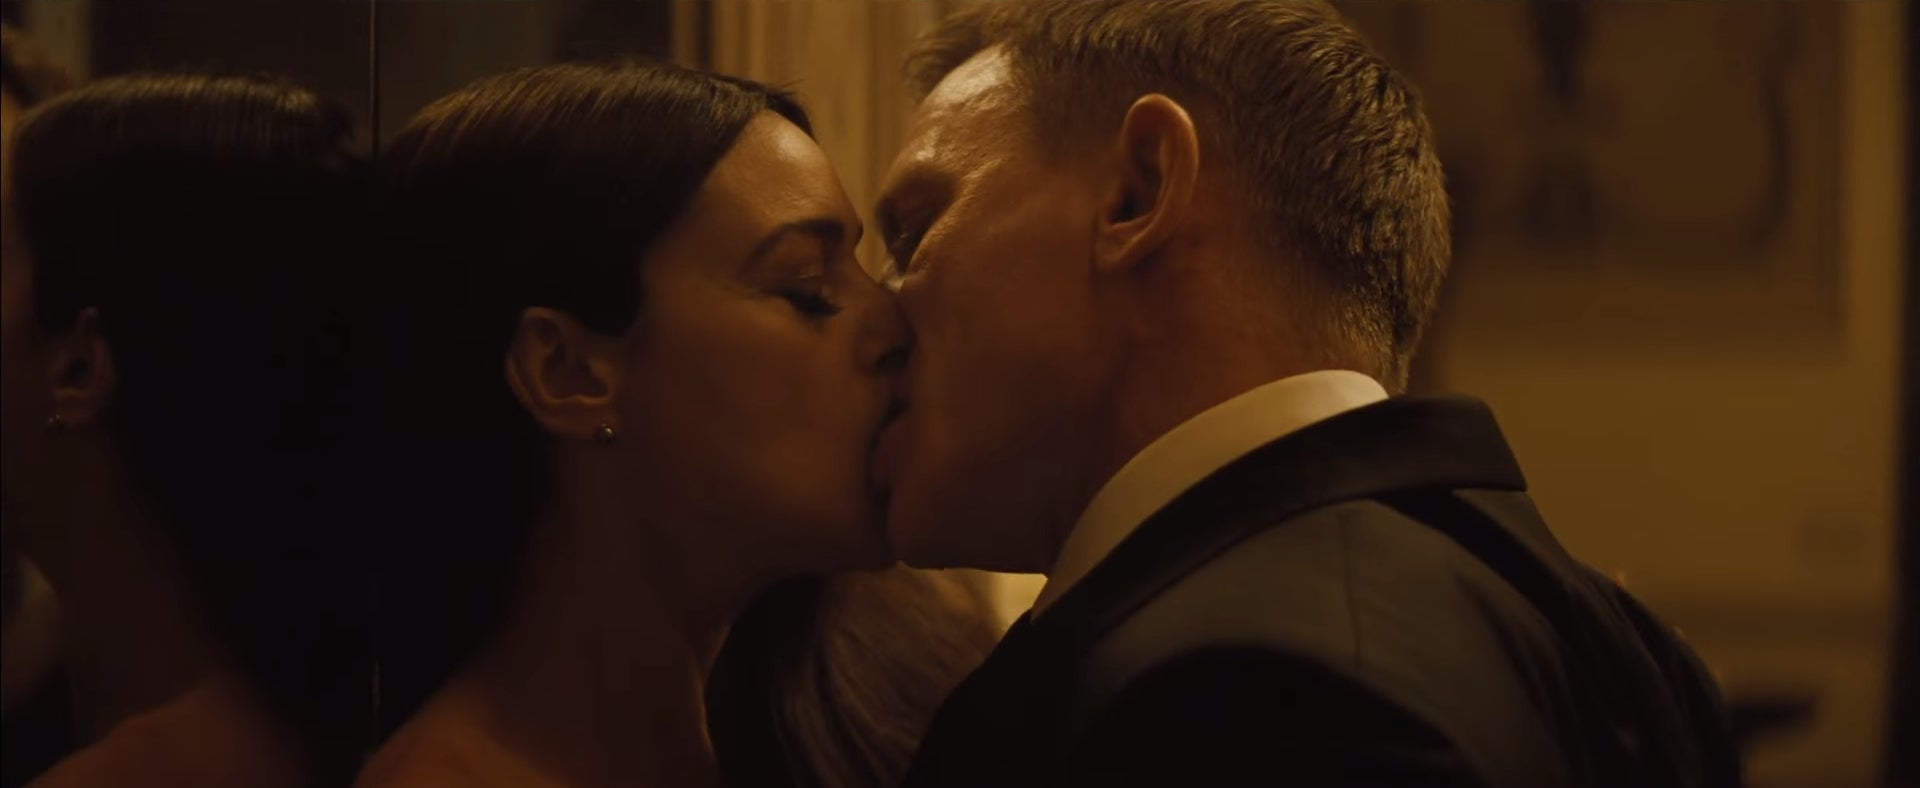 A shot from Smith's music video showing Daniel Craig and Monica Bellucci's characters kissing